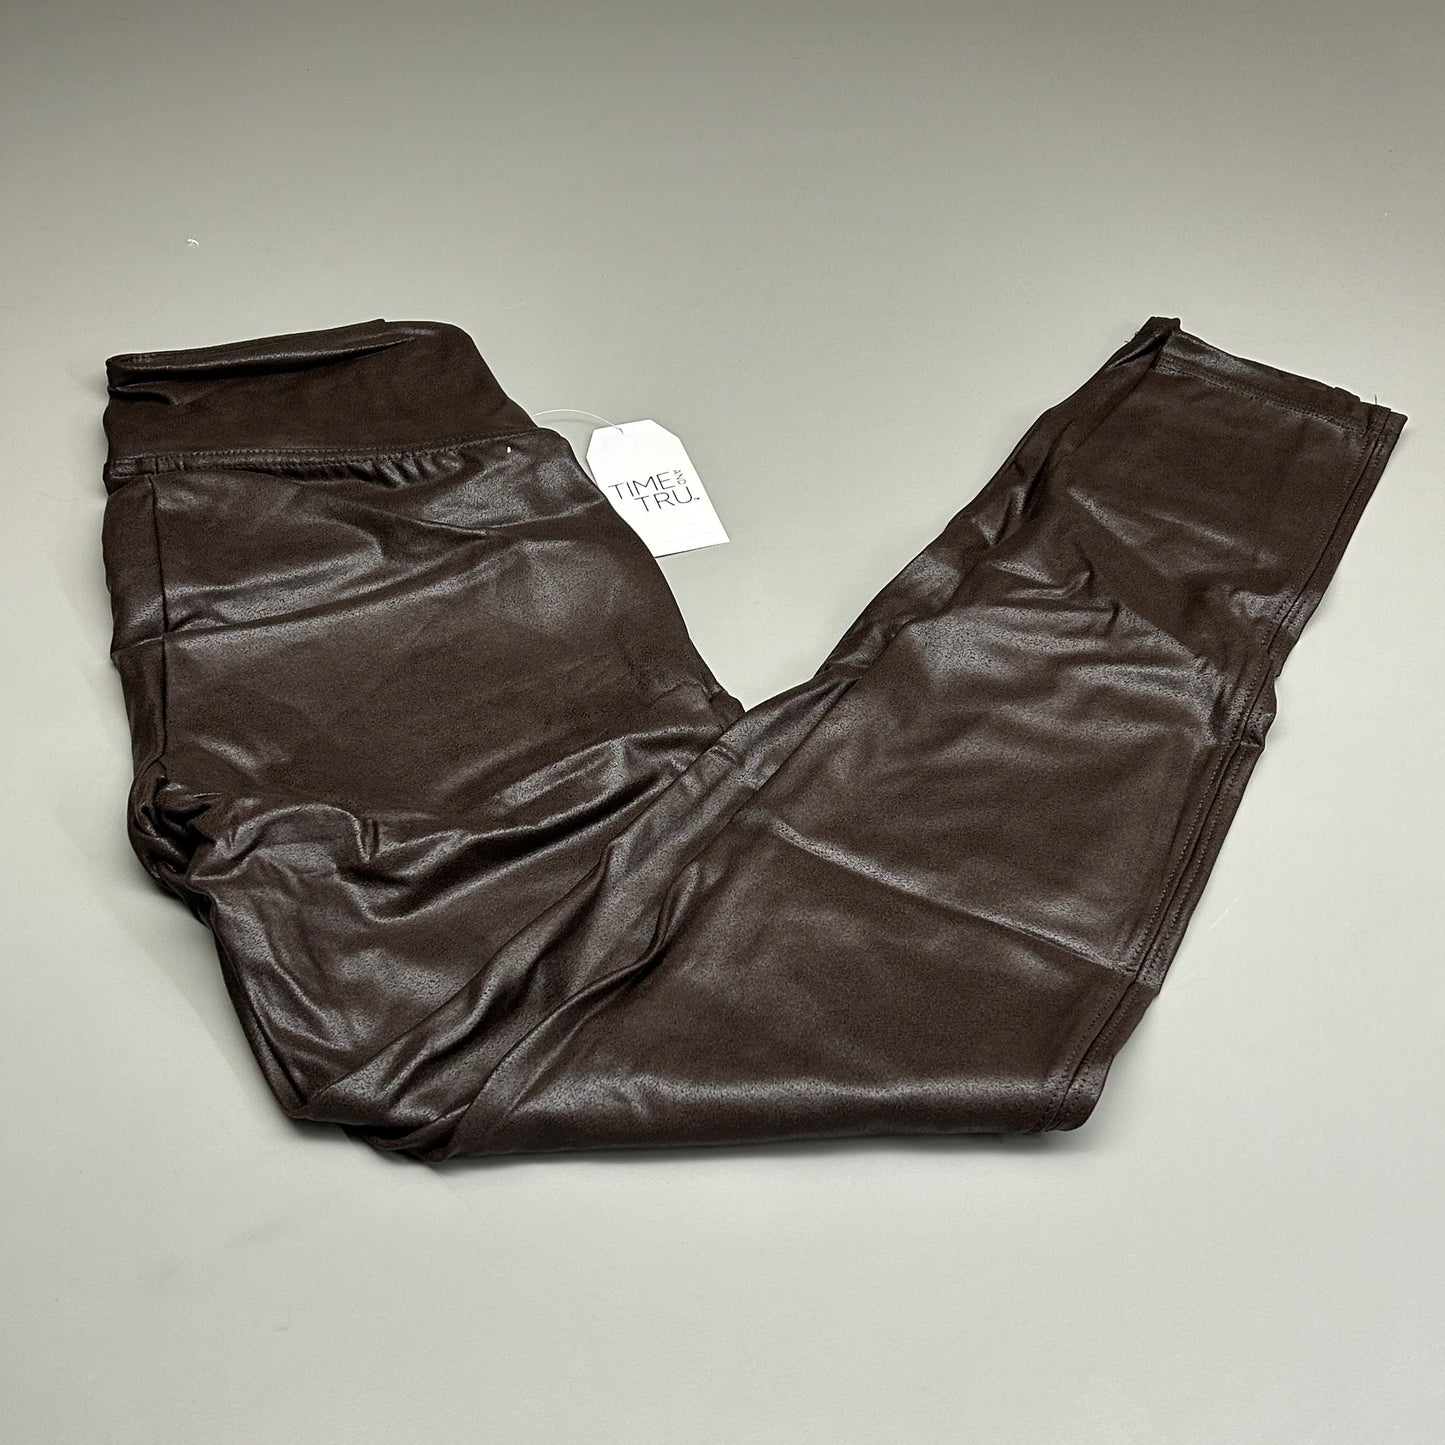 TIME AND TRU Women's Faux Leather Leggings Sz S 4-6 Brown (New)